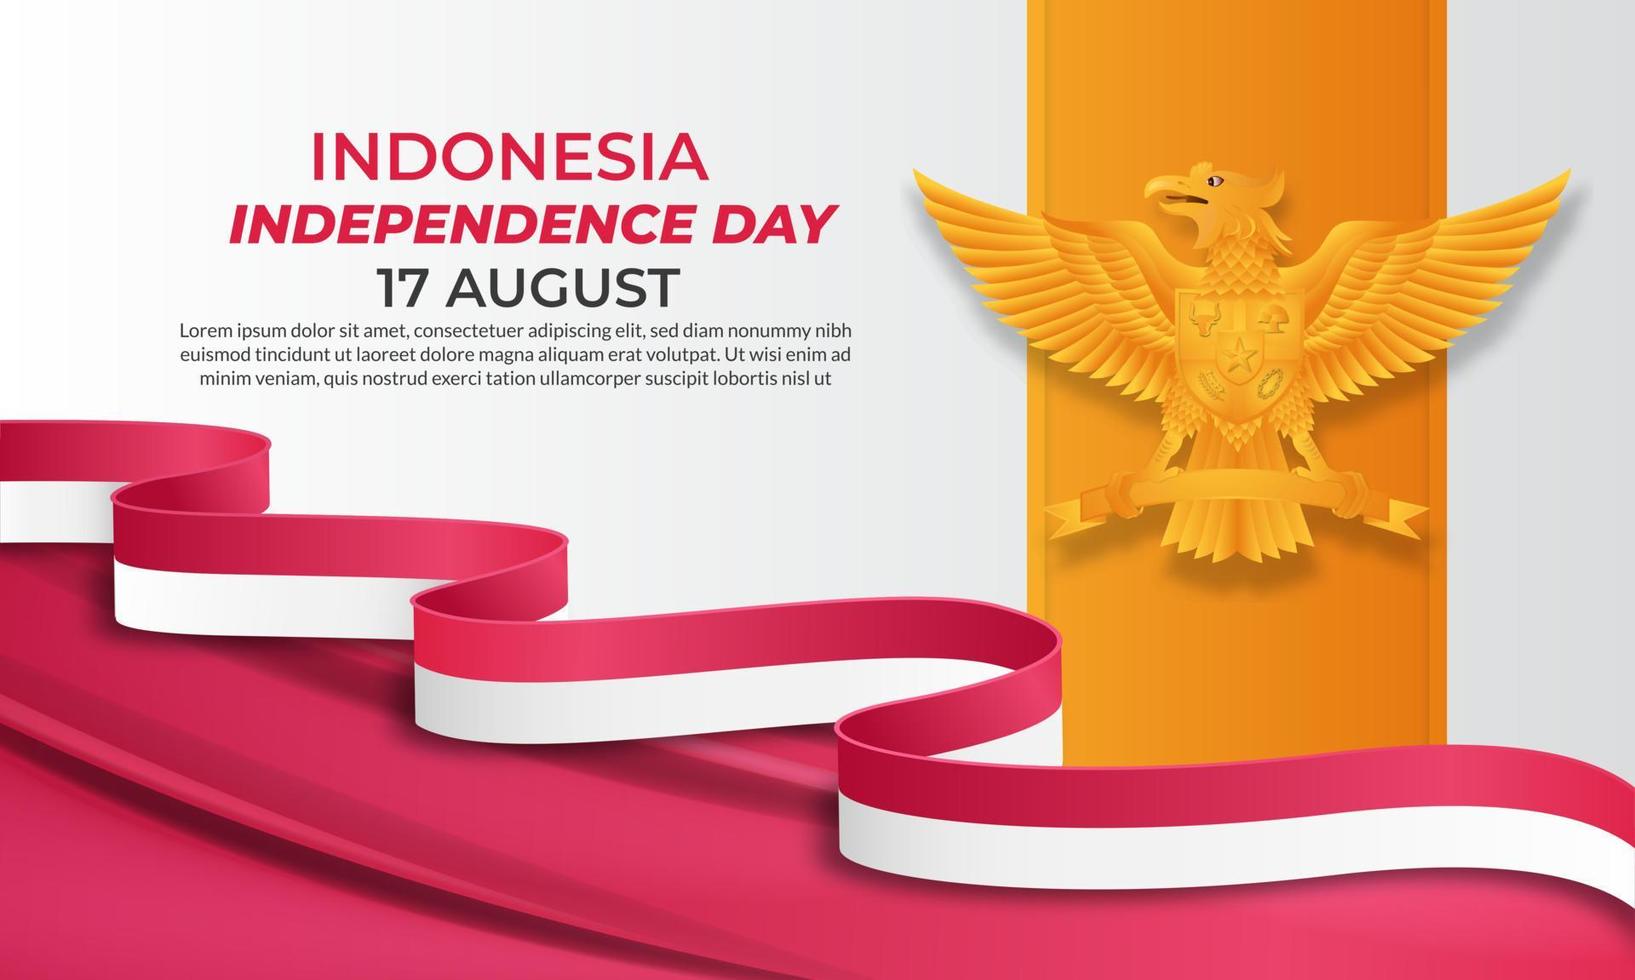 indonesia independence day . Dirgahayu republik indonesia. Illustration, Banner, Poster, background Design vector